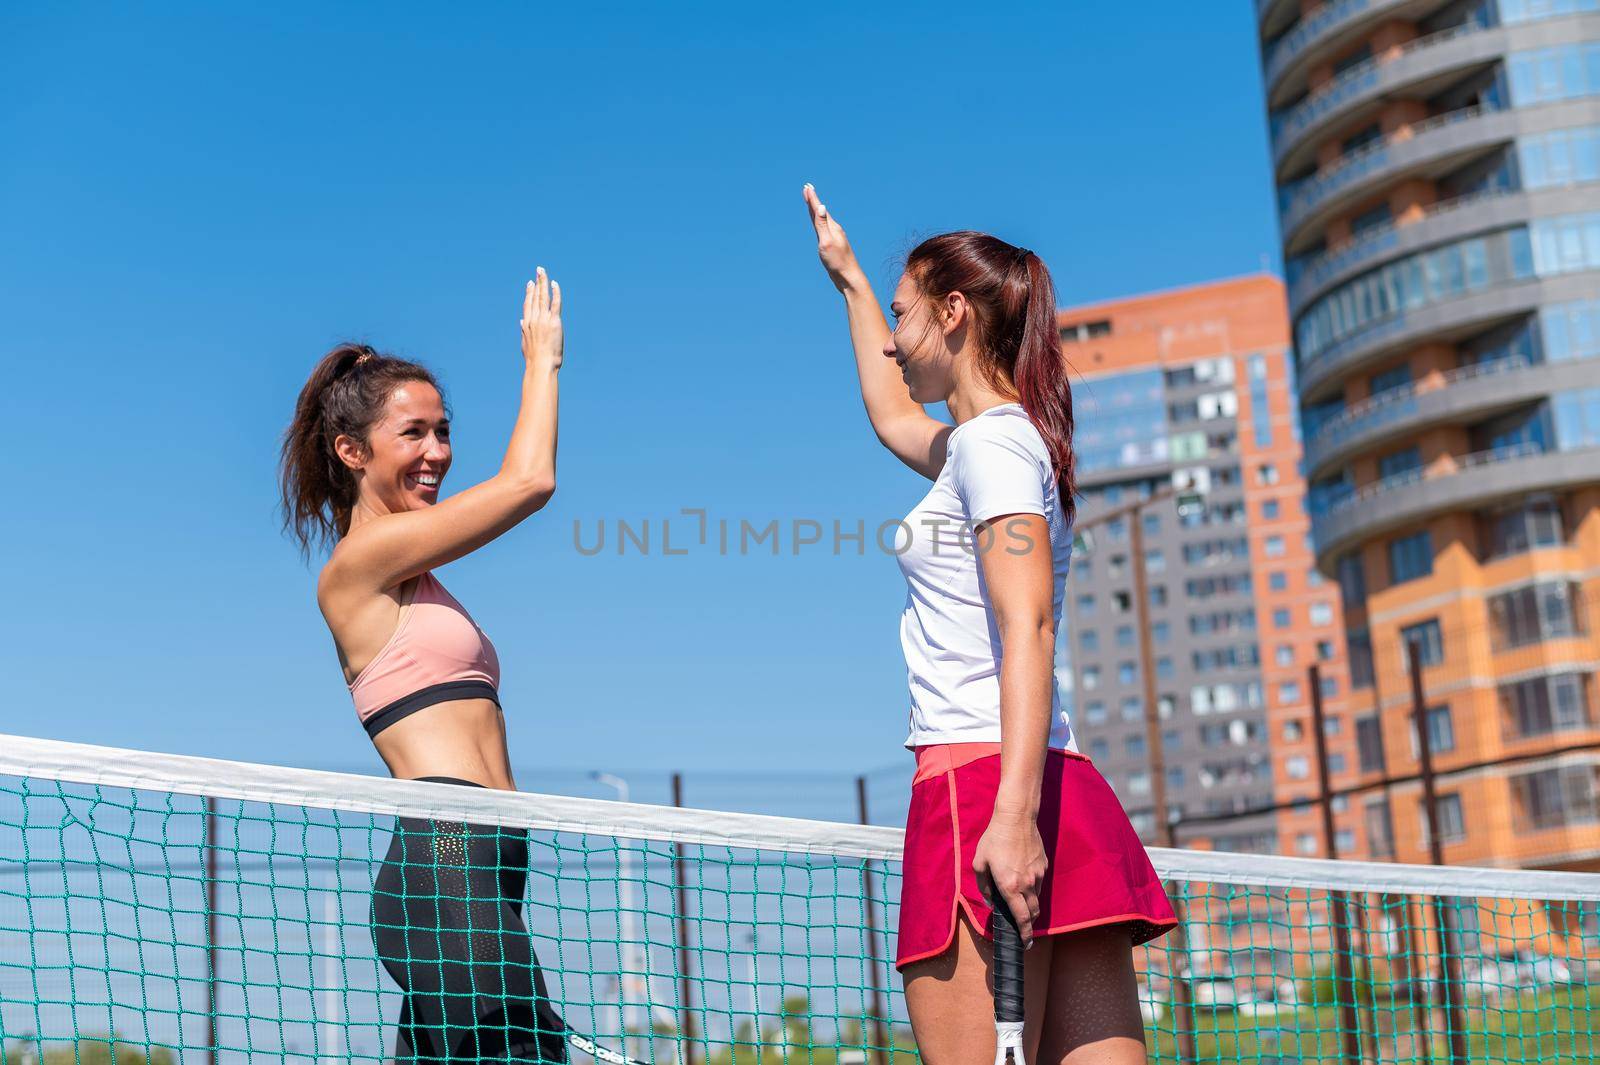 Two Caucasian women in sportswear greeting before a tennis match on an outdoor court. Players give a high five before the game